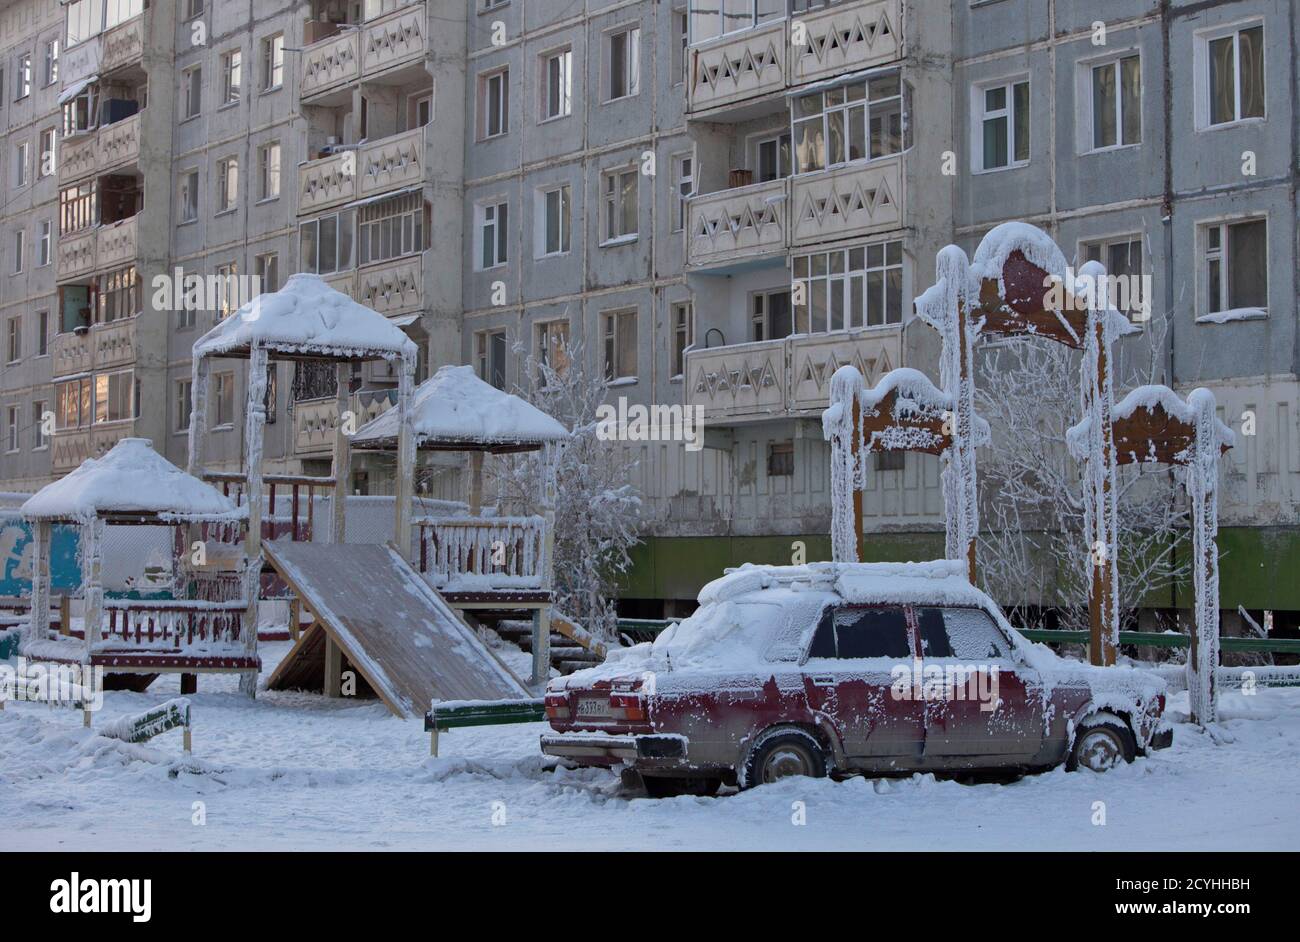 A car covered in ice is pictured near a playground in Yakutsk, in the  Republic of Sakha, northeast Russia, February 4, 2013. The coldest  temperatures in the northern hemisphere have been recorded